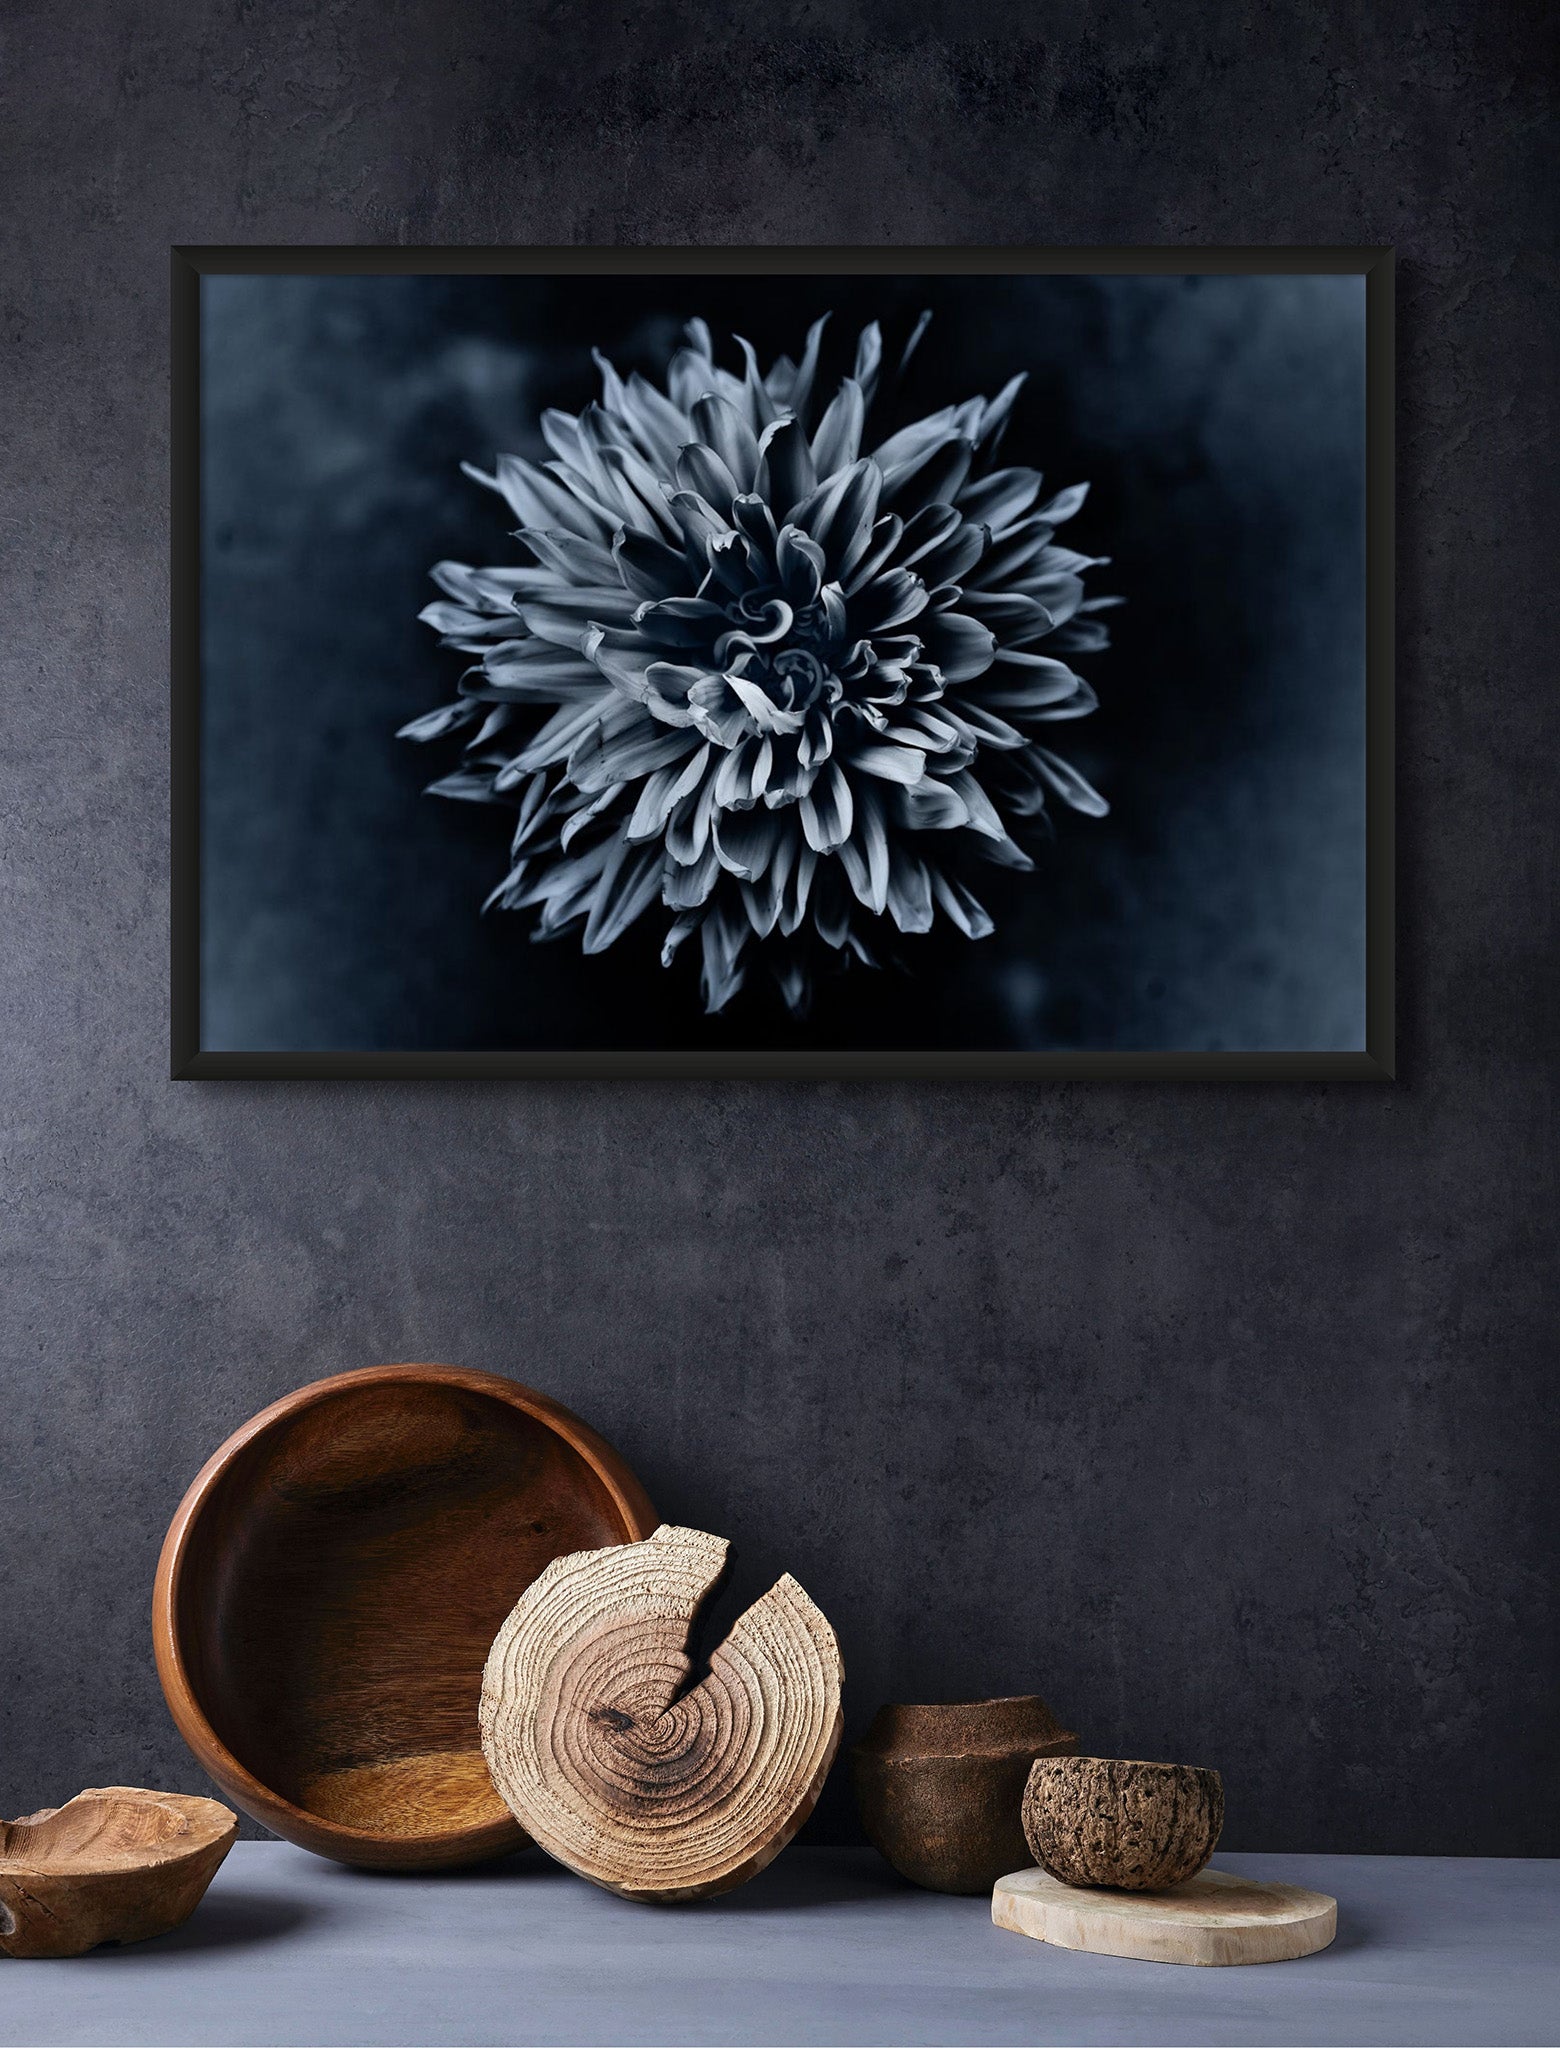 Flower photography hanging on the wall with some straw pots below it.  The Photograph is Black Dahlia by Cameron Dreaux Titled "Black Dahlia No. 1." The photograph is a black and white flower photo of a Dahlia flower. 